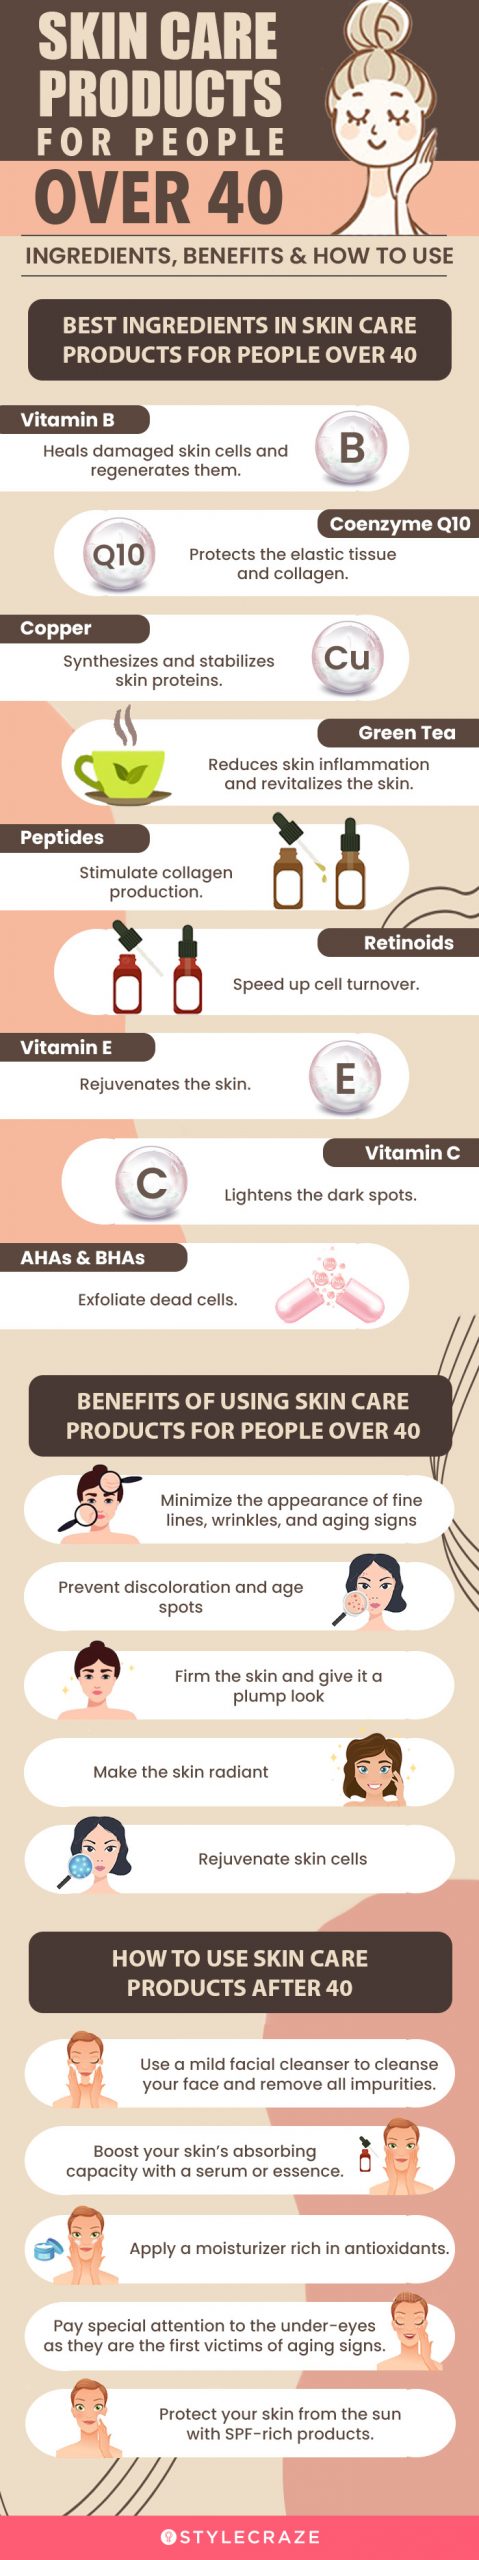 Skin Care Products For People Over 40: Ingredients [infographic]